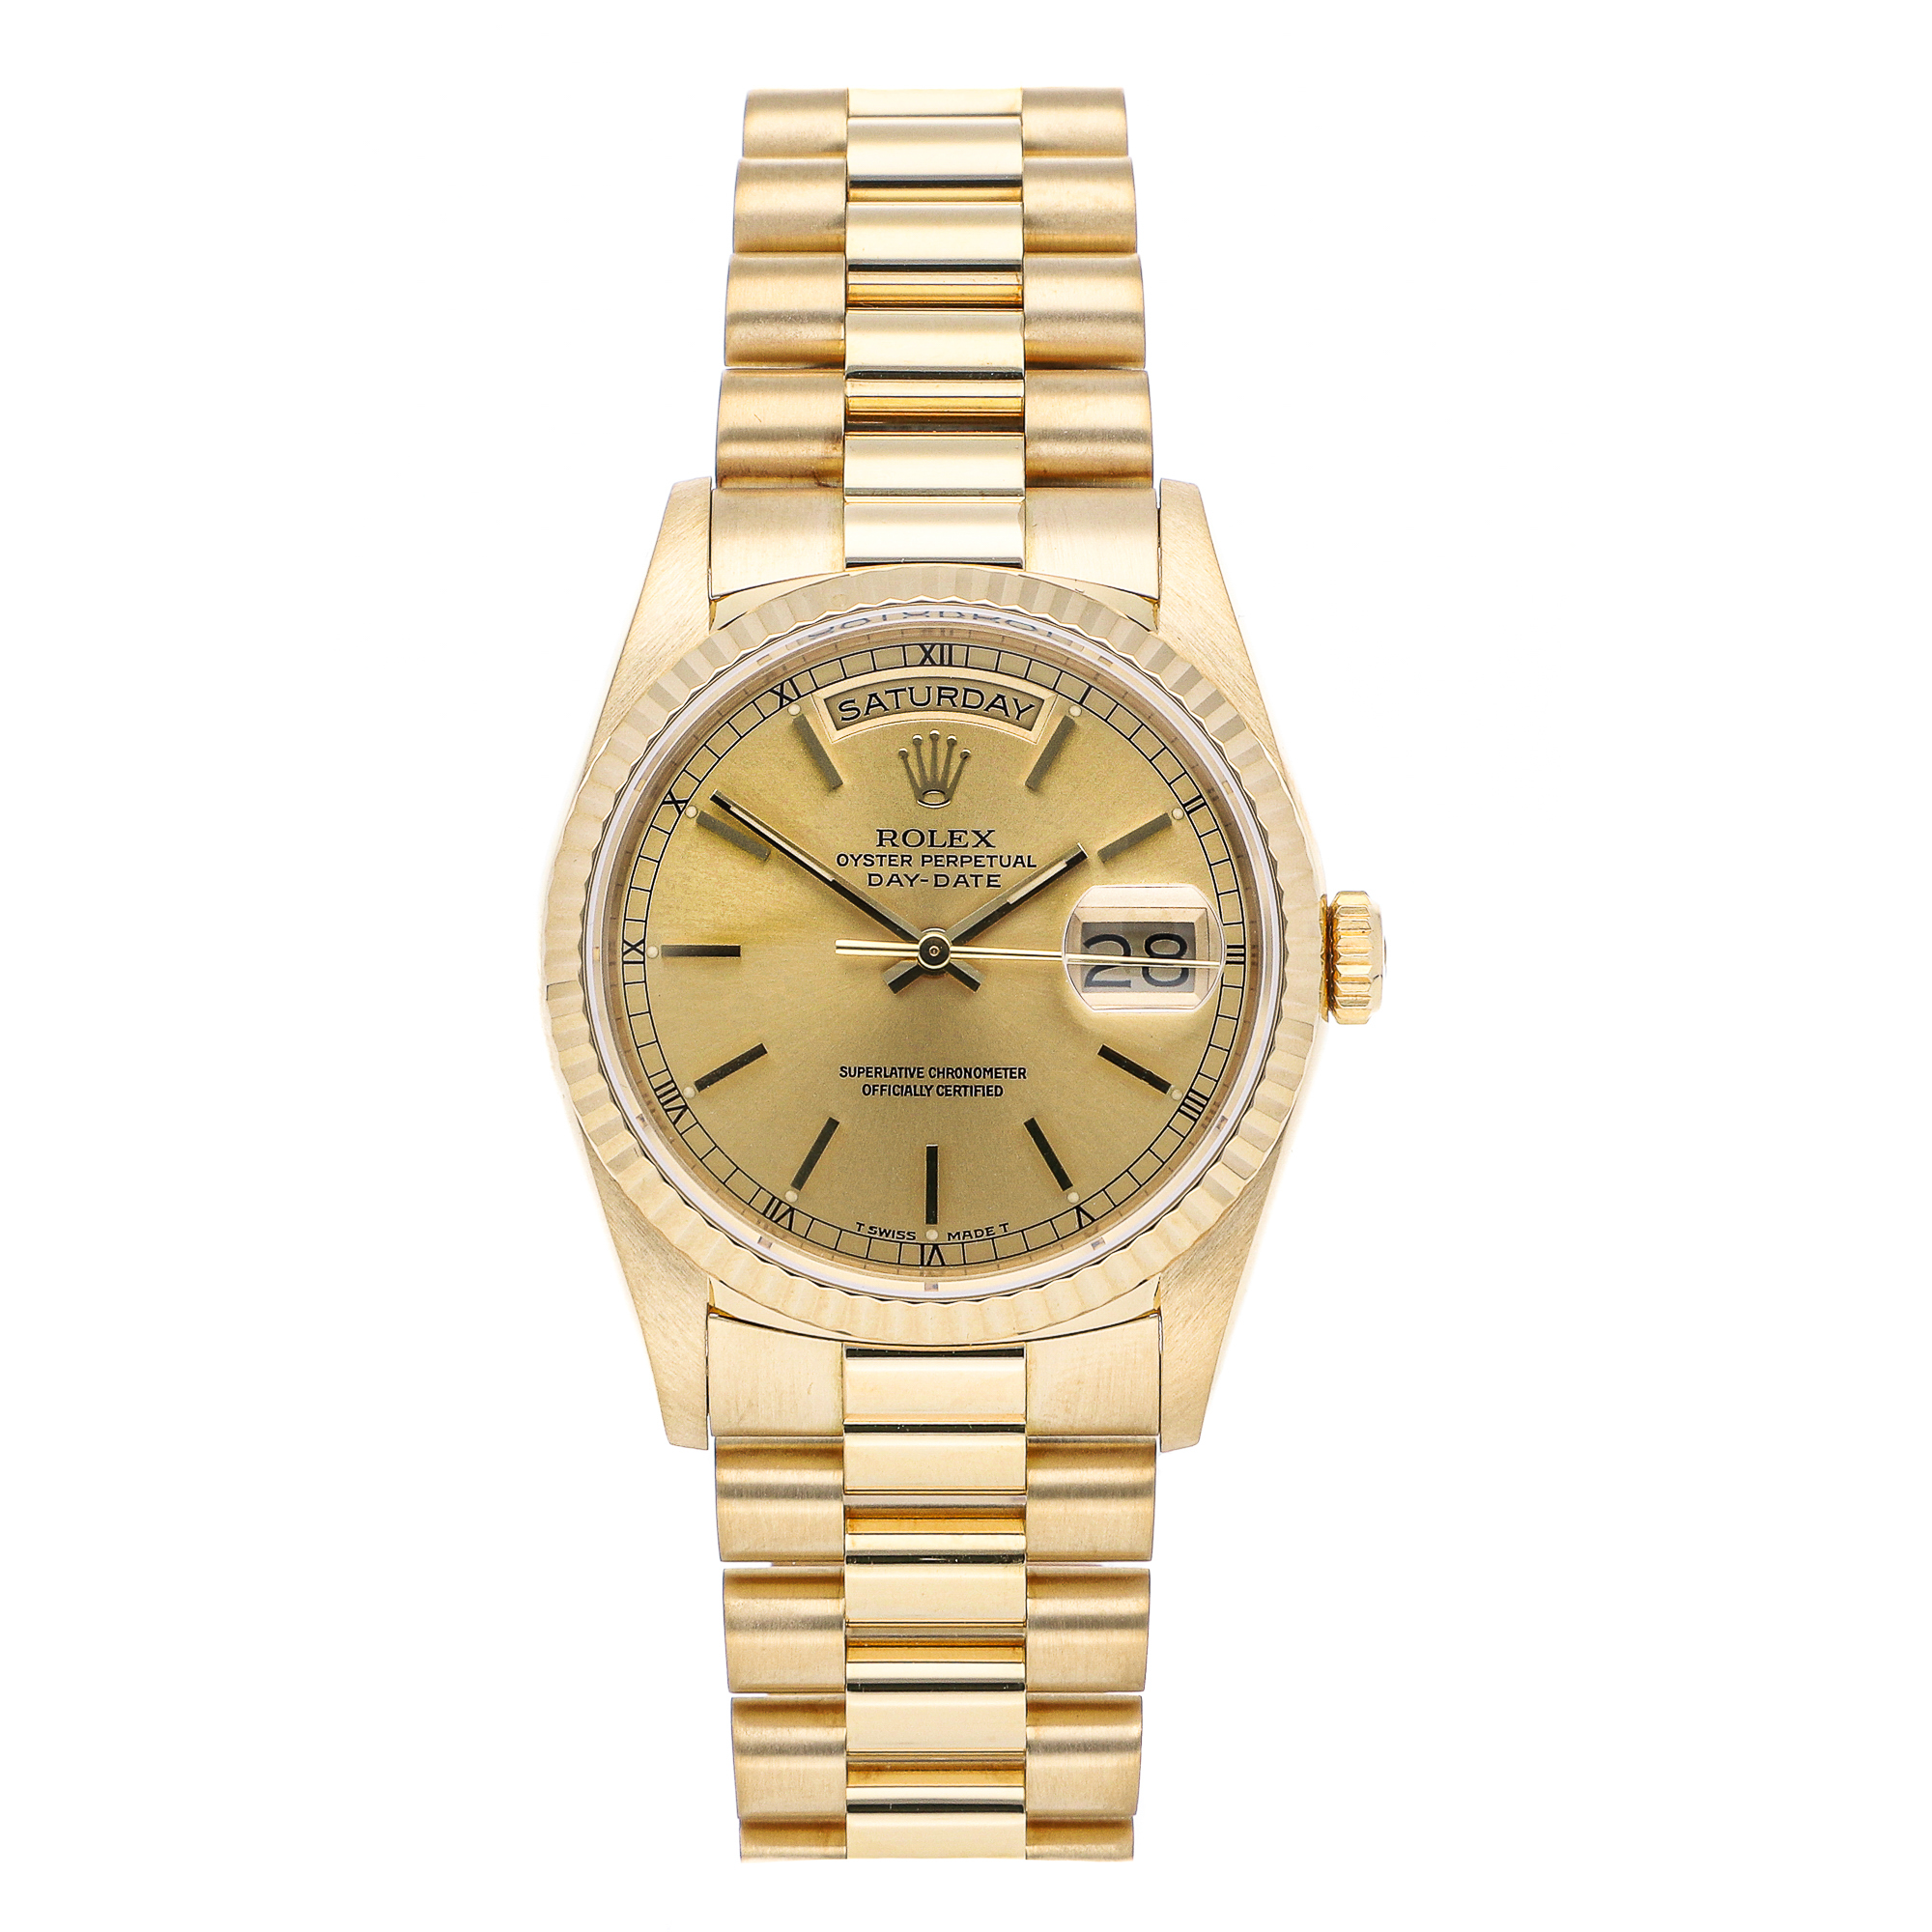 Pre-Owned Rolex Day-Date 18238 CHP IX PRES